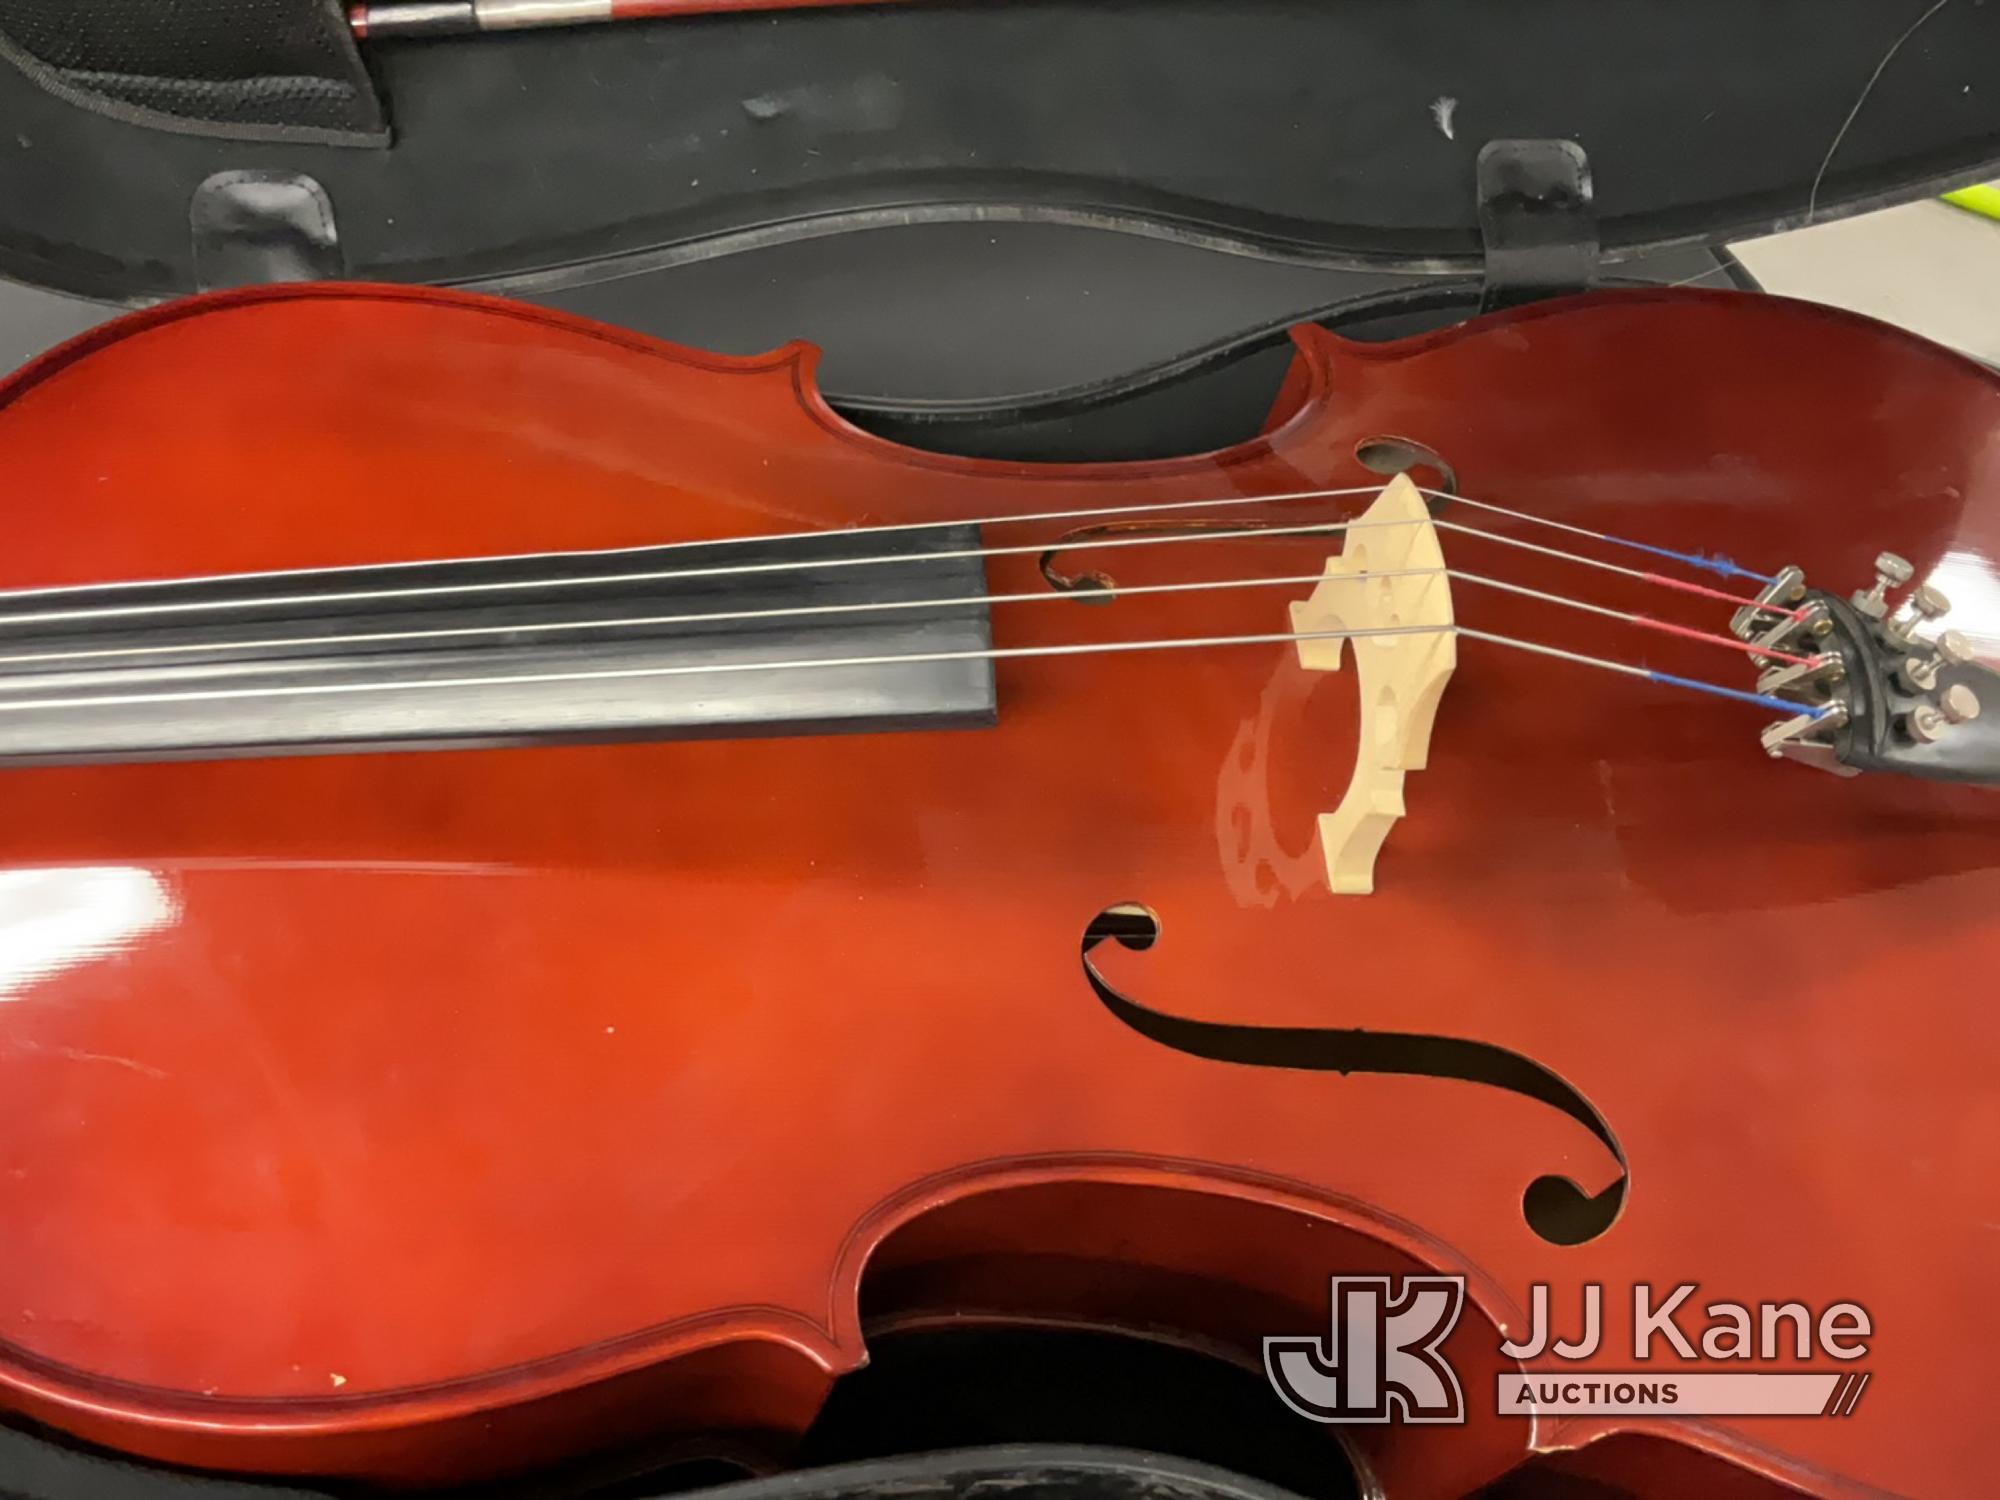 (Jurupa Valley, CA) Cello With Hardcase (Used) NOTE: This unit is being sold AS IS/WHERE IS via Time